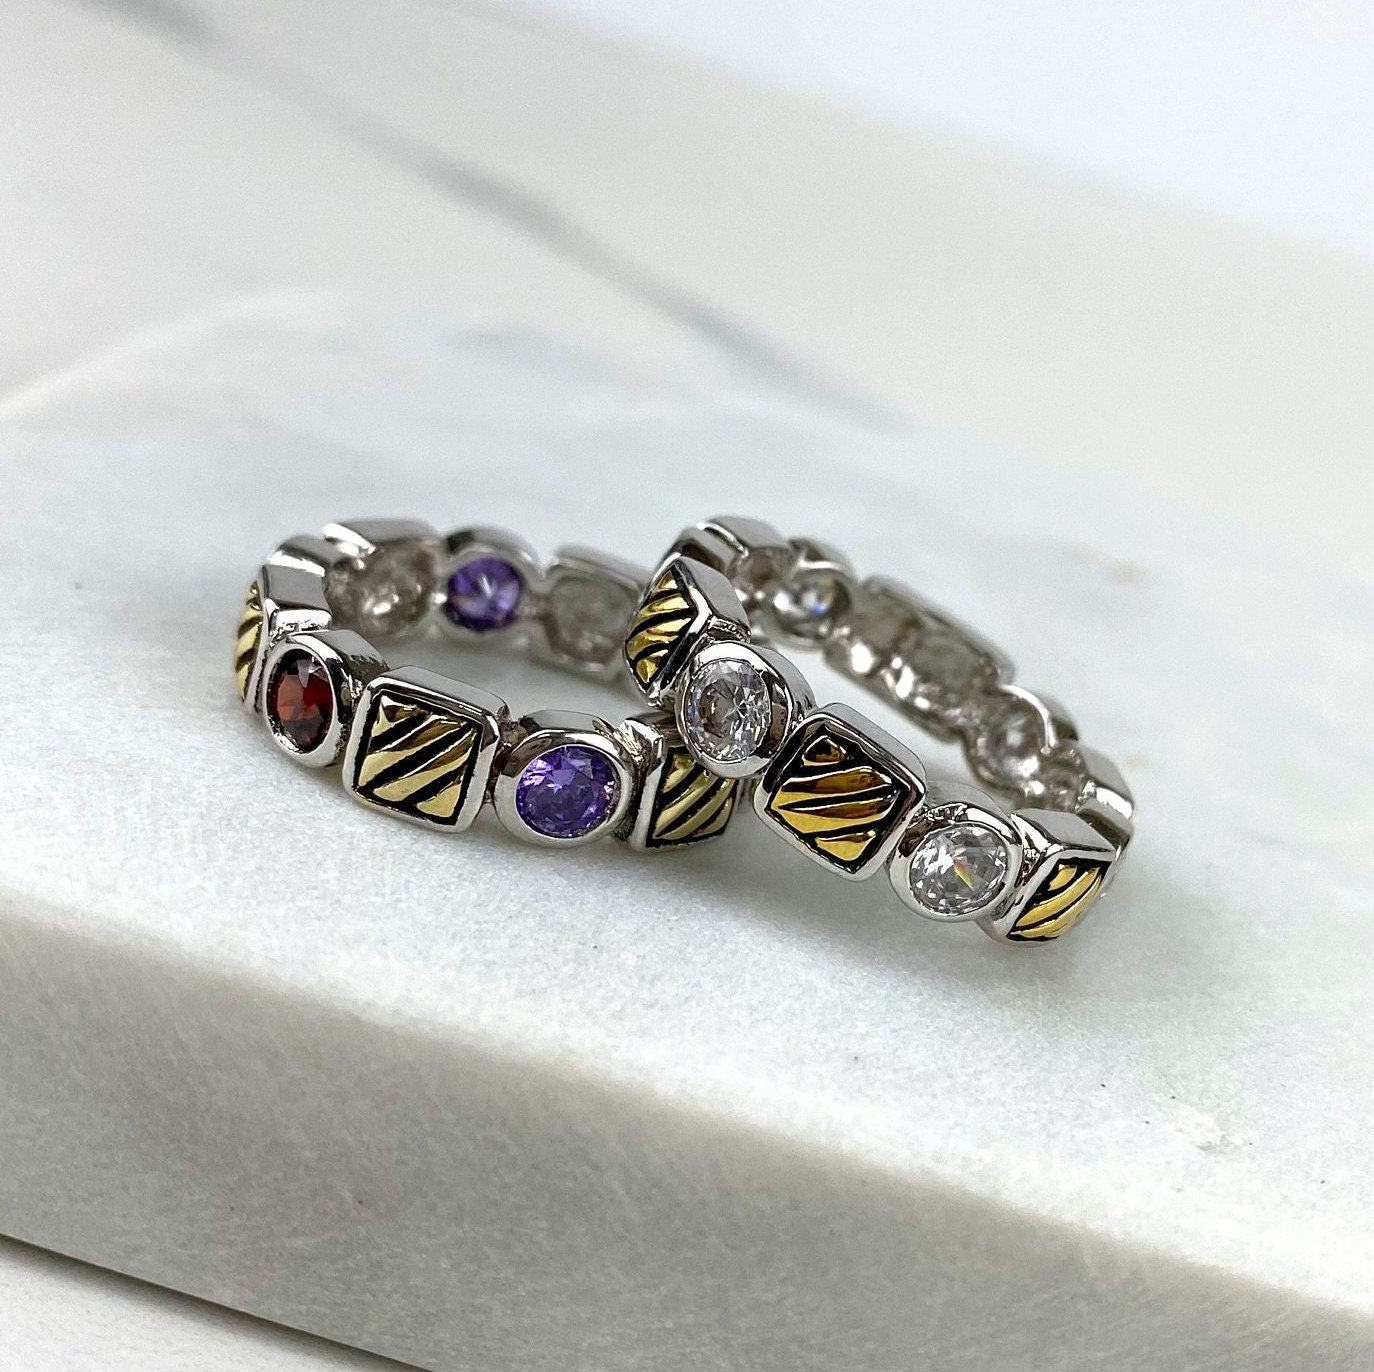 Vintage Aged Rhodium Filled Fancy Rings Featuring Designed Pattern Gold and Cubic Zirconia For Wholesale and Jewelry Supplies